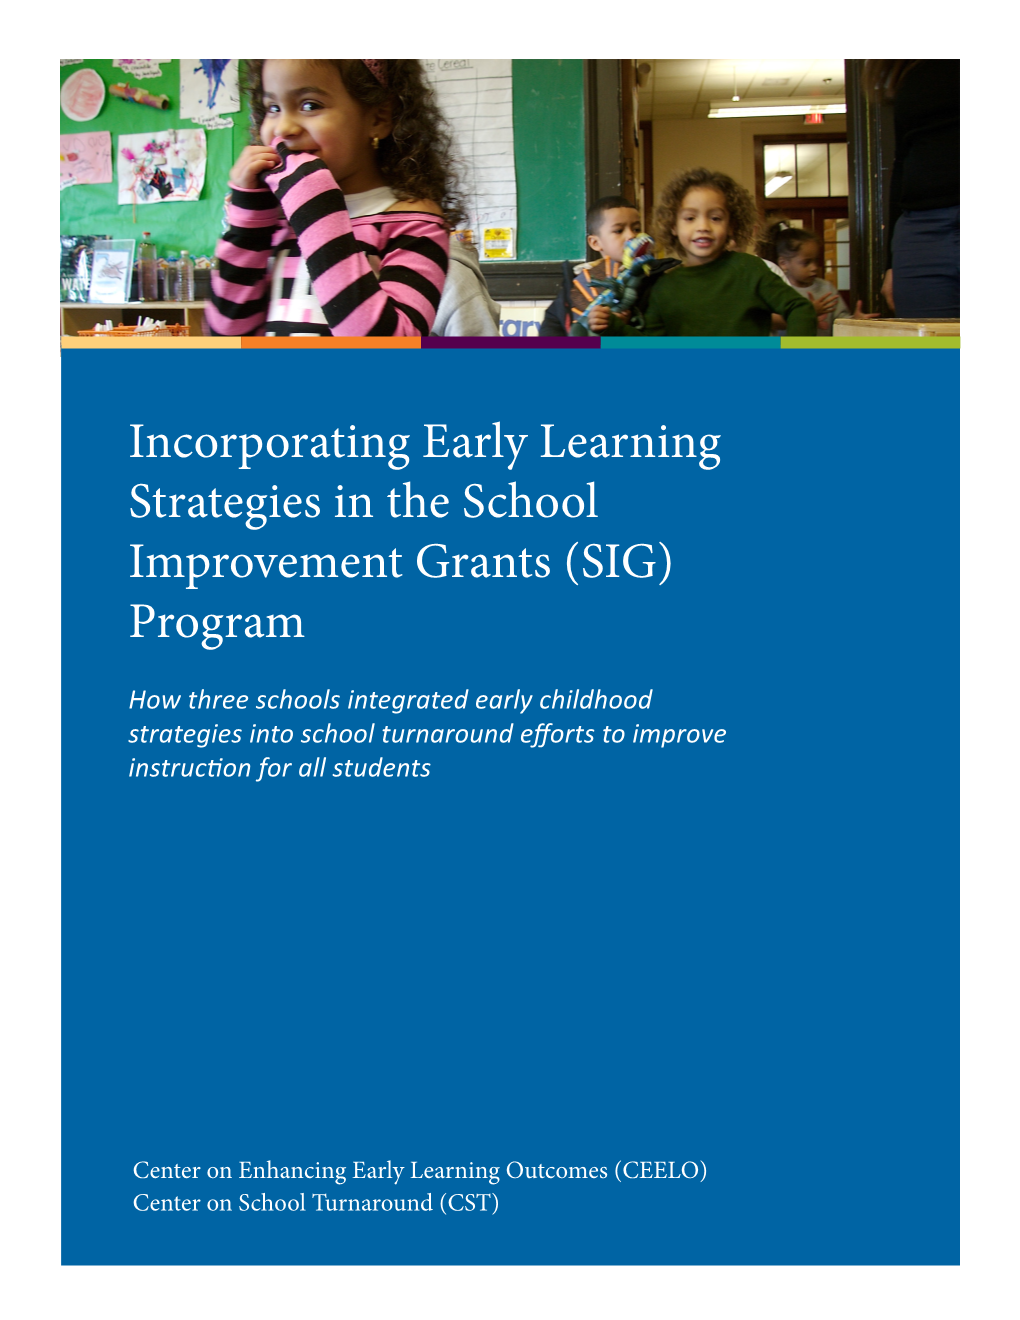 Incorporating Early Learning Strategies in the School Improvement Grants (SIG) Program